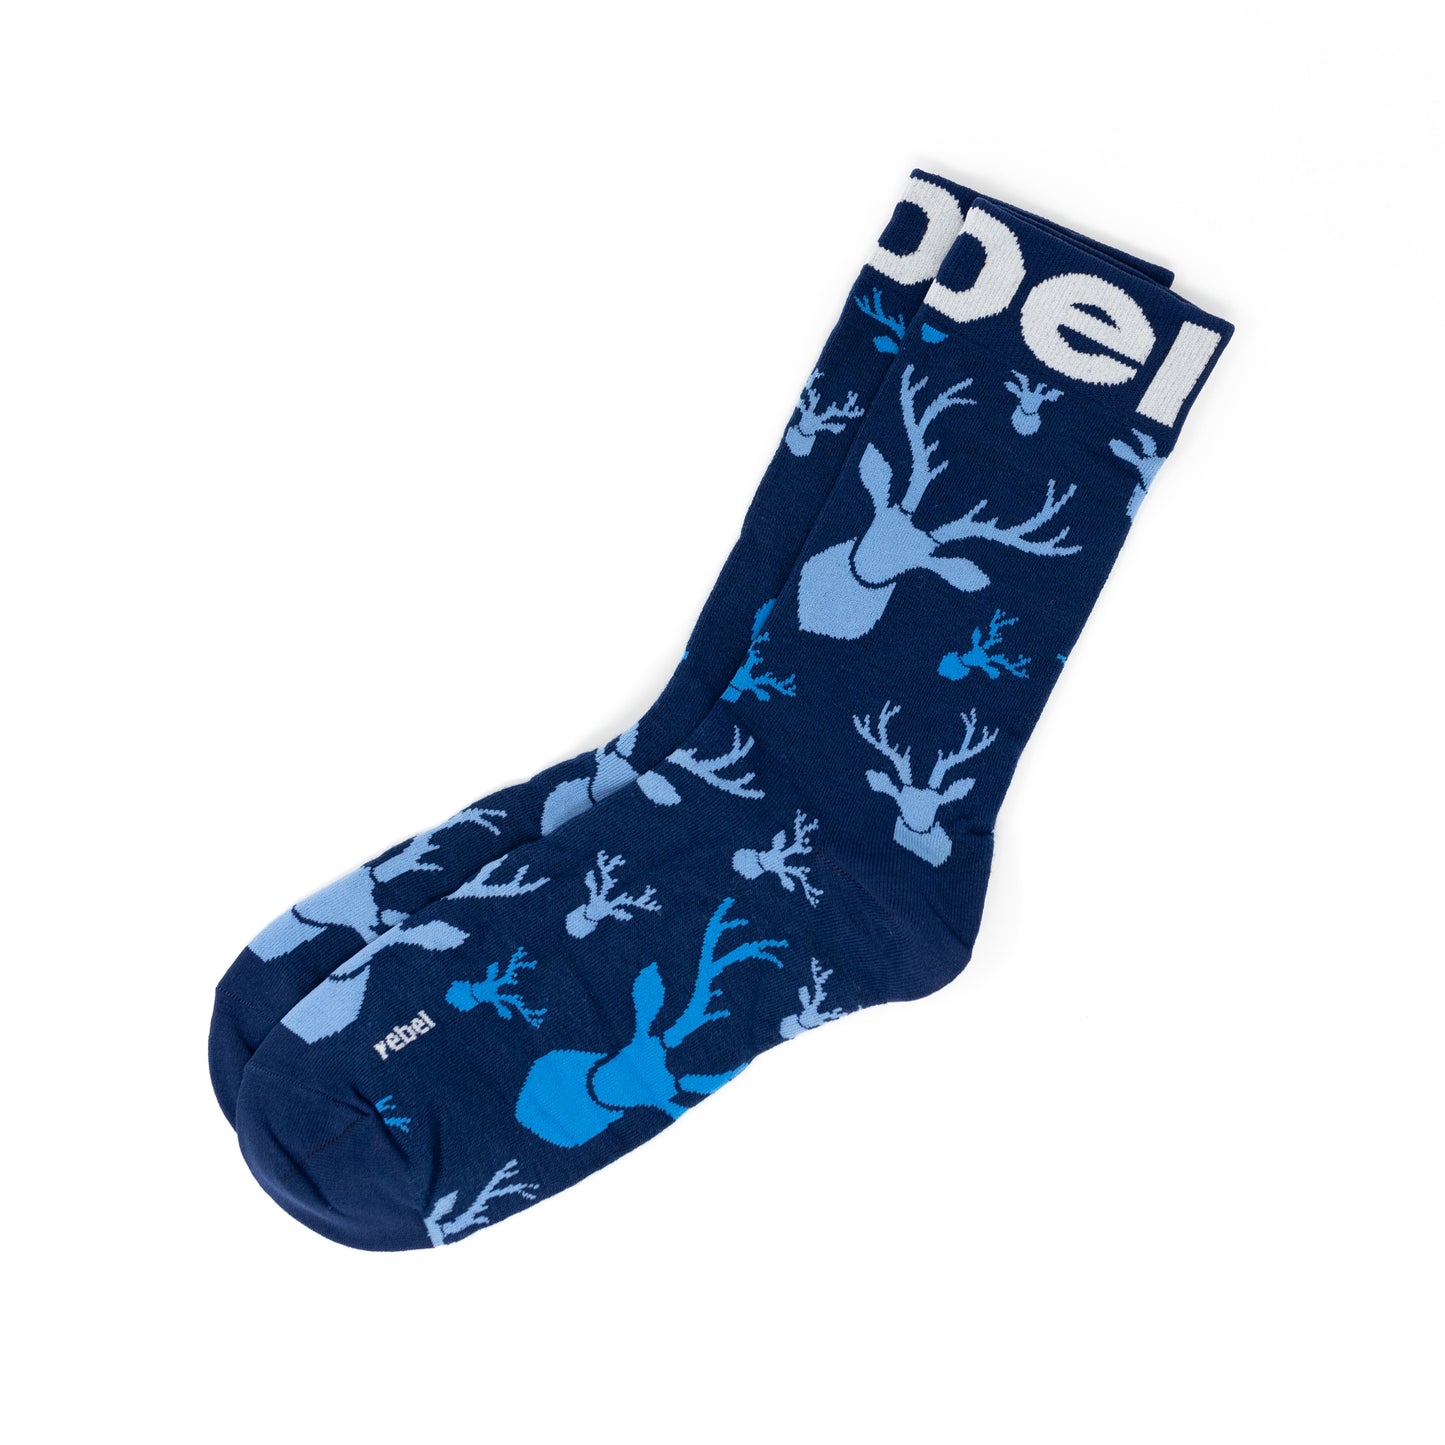 Our Blue Deer Socks are the perfect addition to any wardrobe, whether you're dressing up or dressing down.